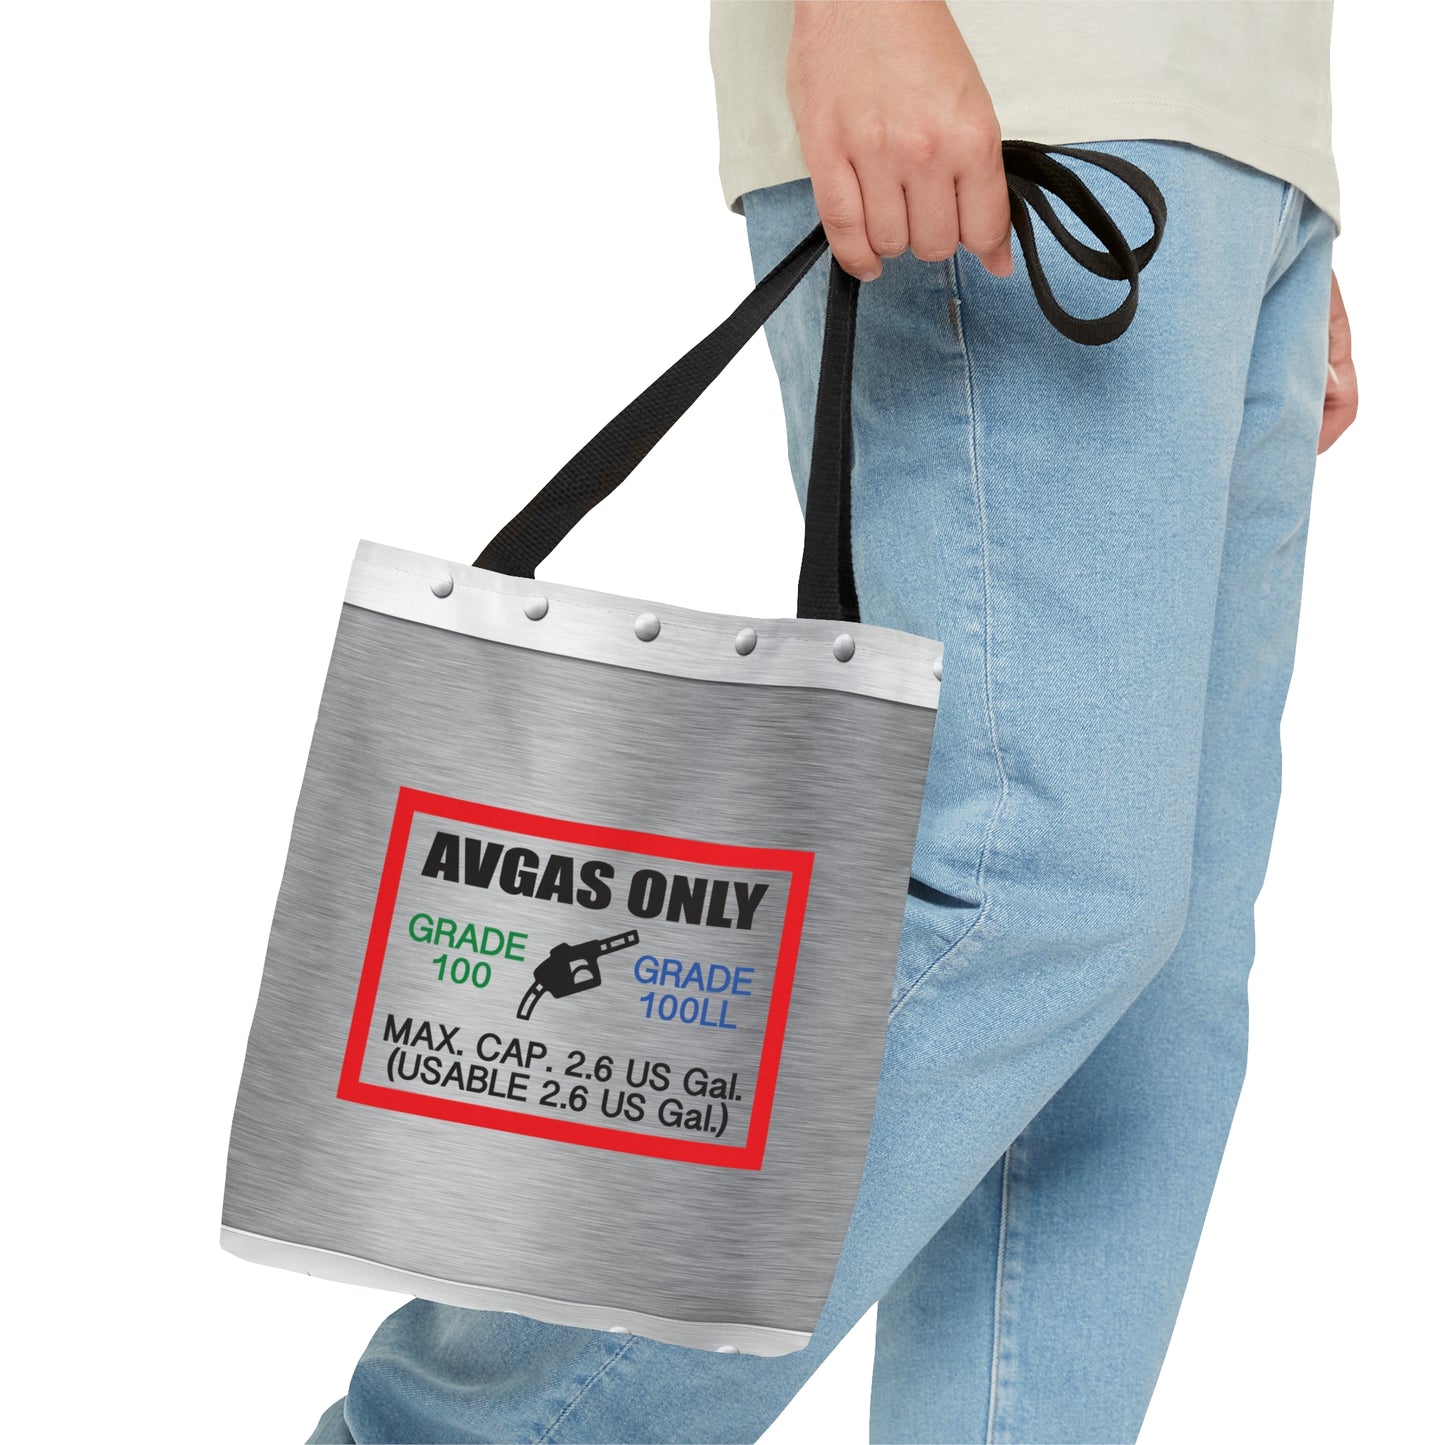 Avgas Only 100LL tote bag